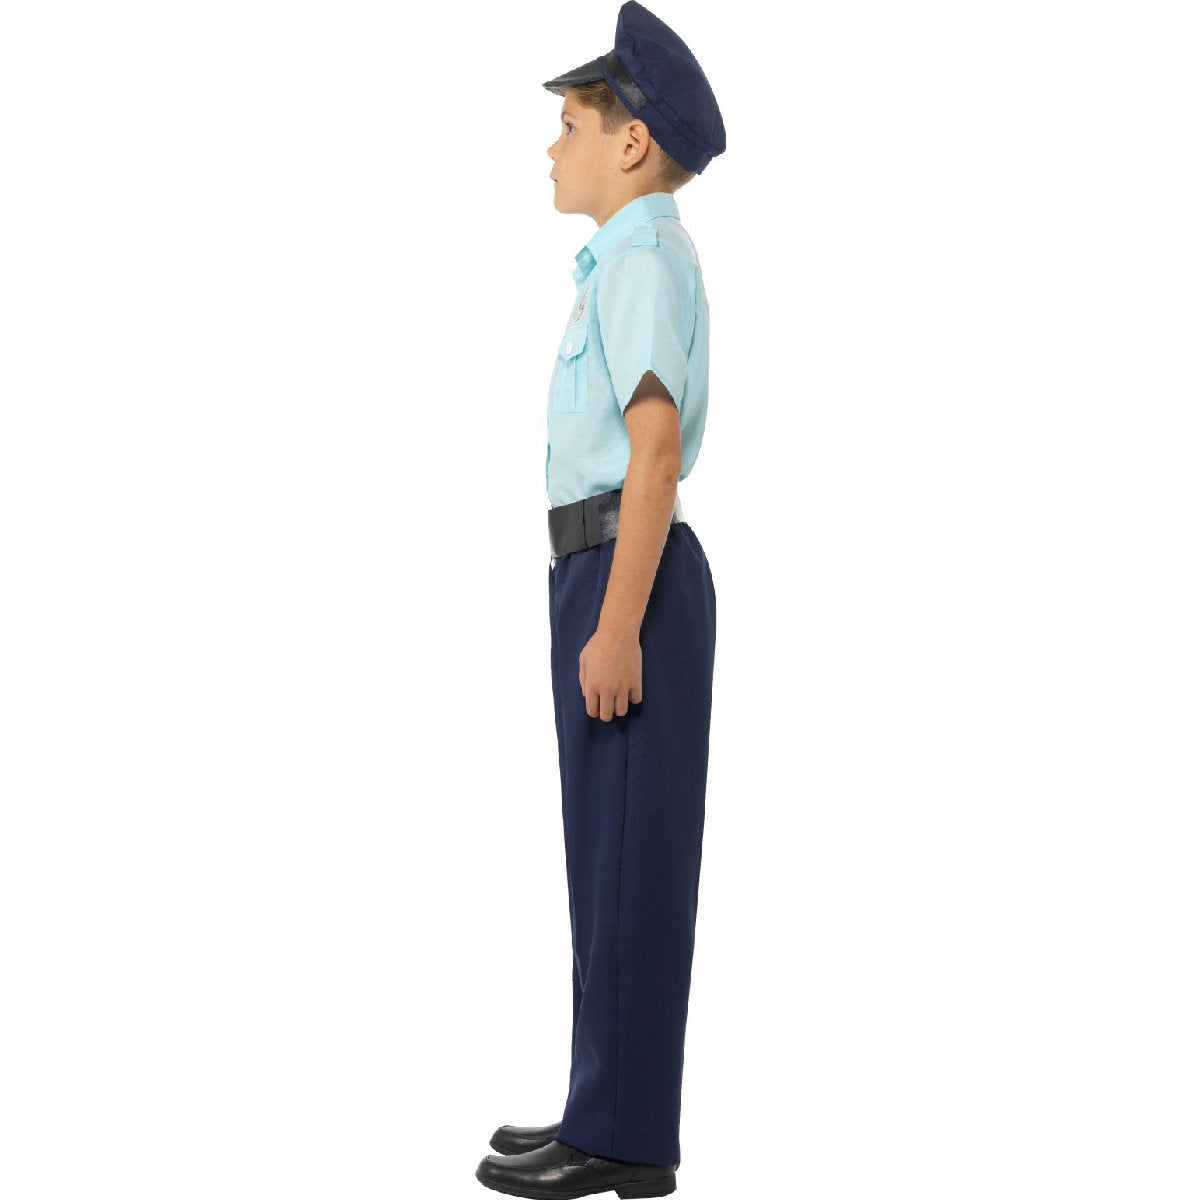 Police Officer Cop Boy's Complete Costume with Hat